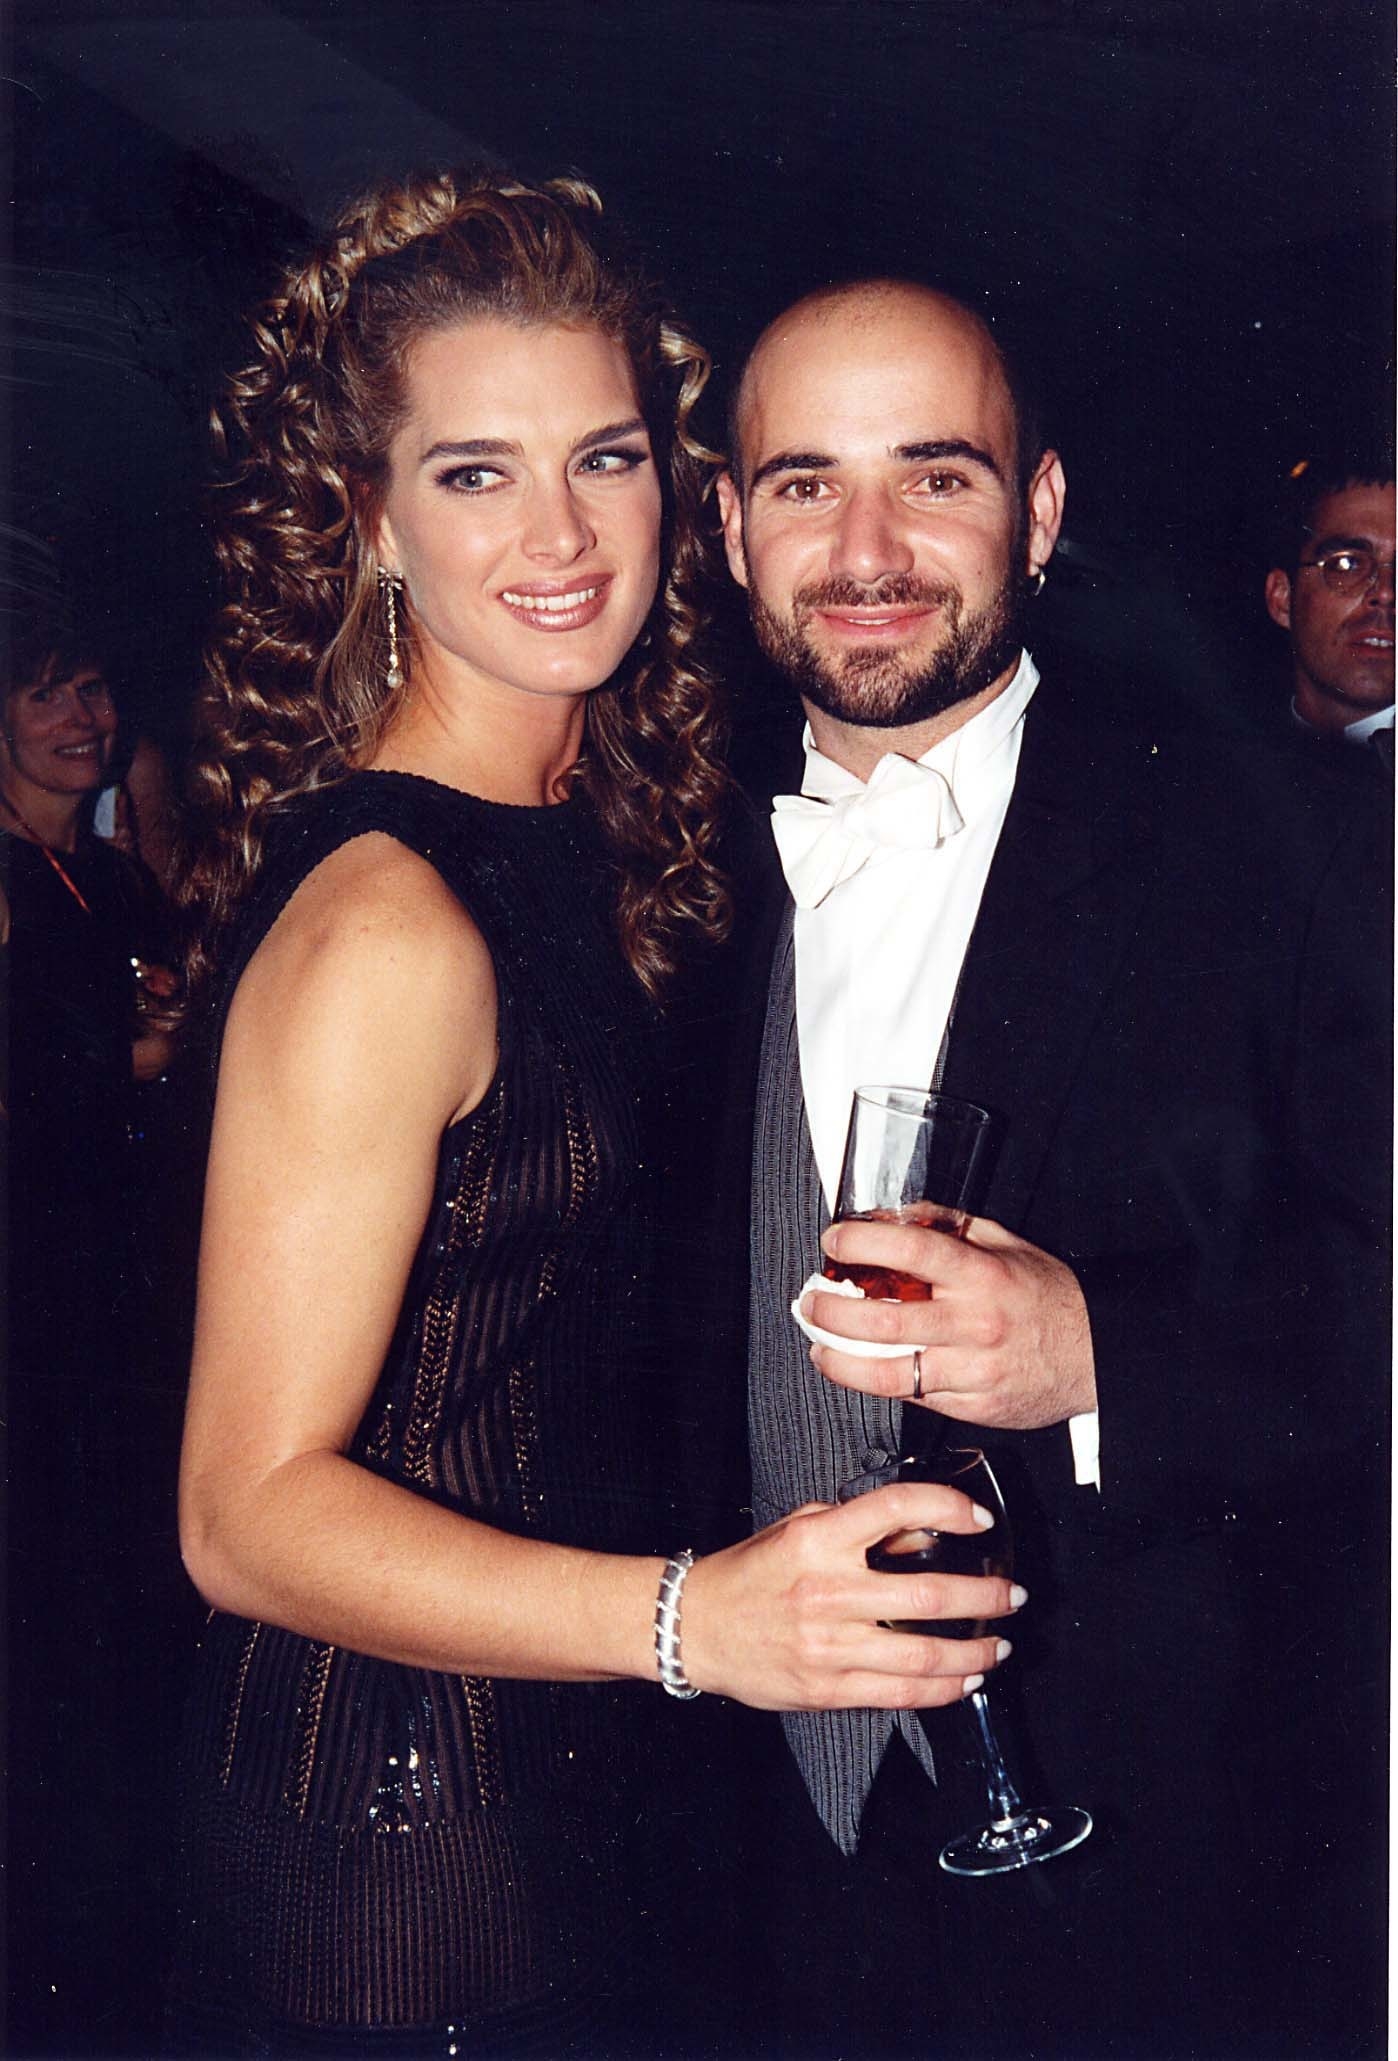 Brooke Shields and Andre Agassi